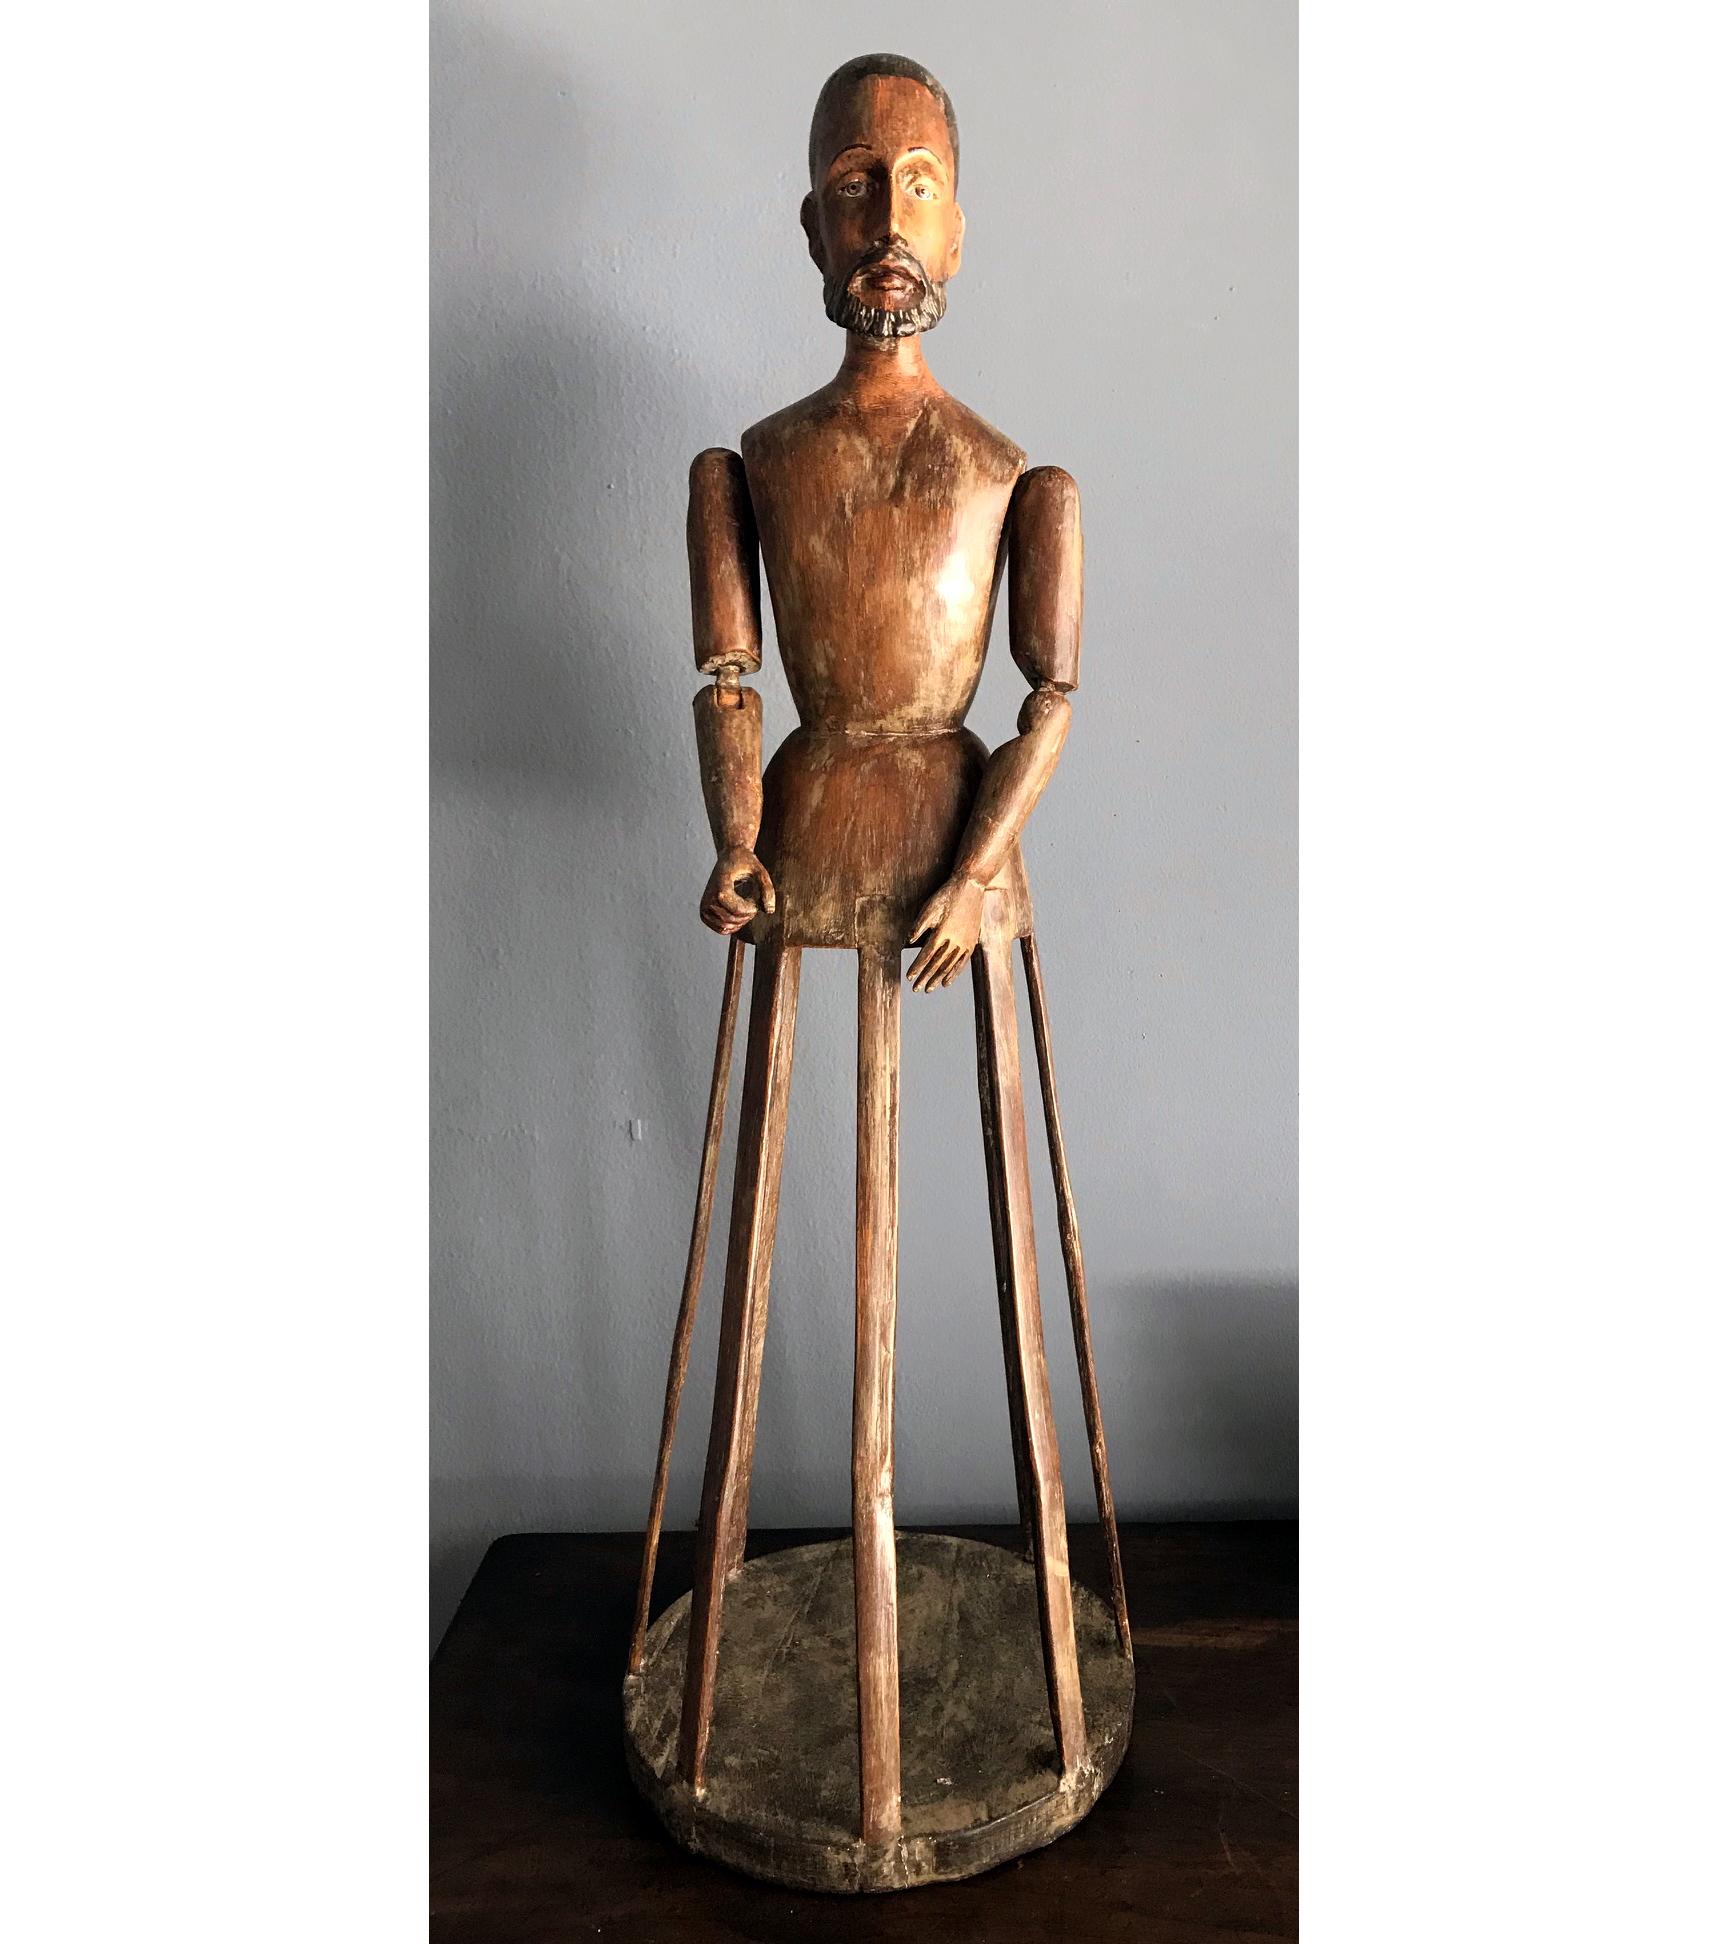 A wonderful antique Santo carved in wood with articulated arms and a slatted base from Spanish Colonial Latin America, likely Mexico. Wonderful patina with detailed facial feature and glass eyes. This kind of Santos are also known as the 